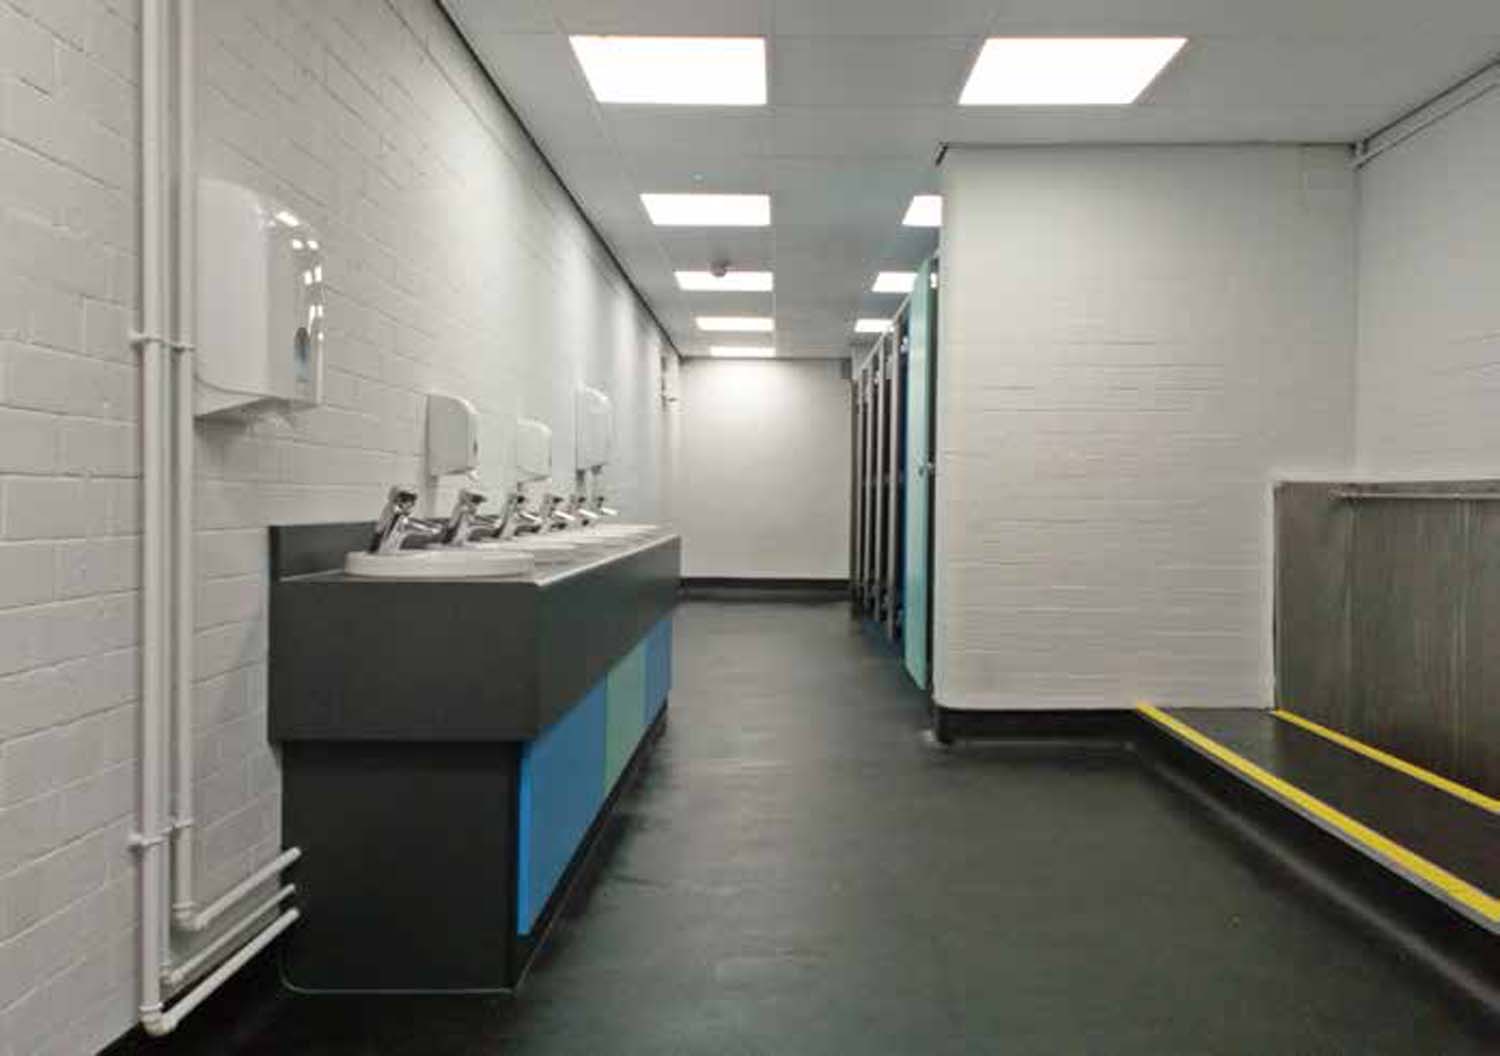 A corridor with a row of sinks on one side and a row of cubicles on the other.